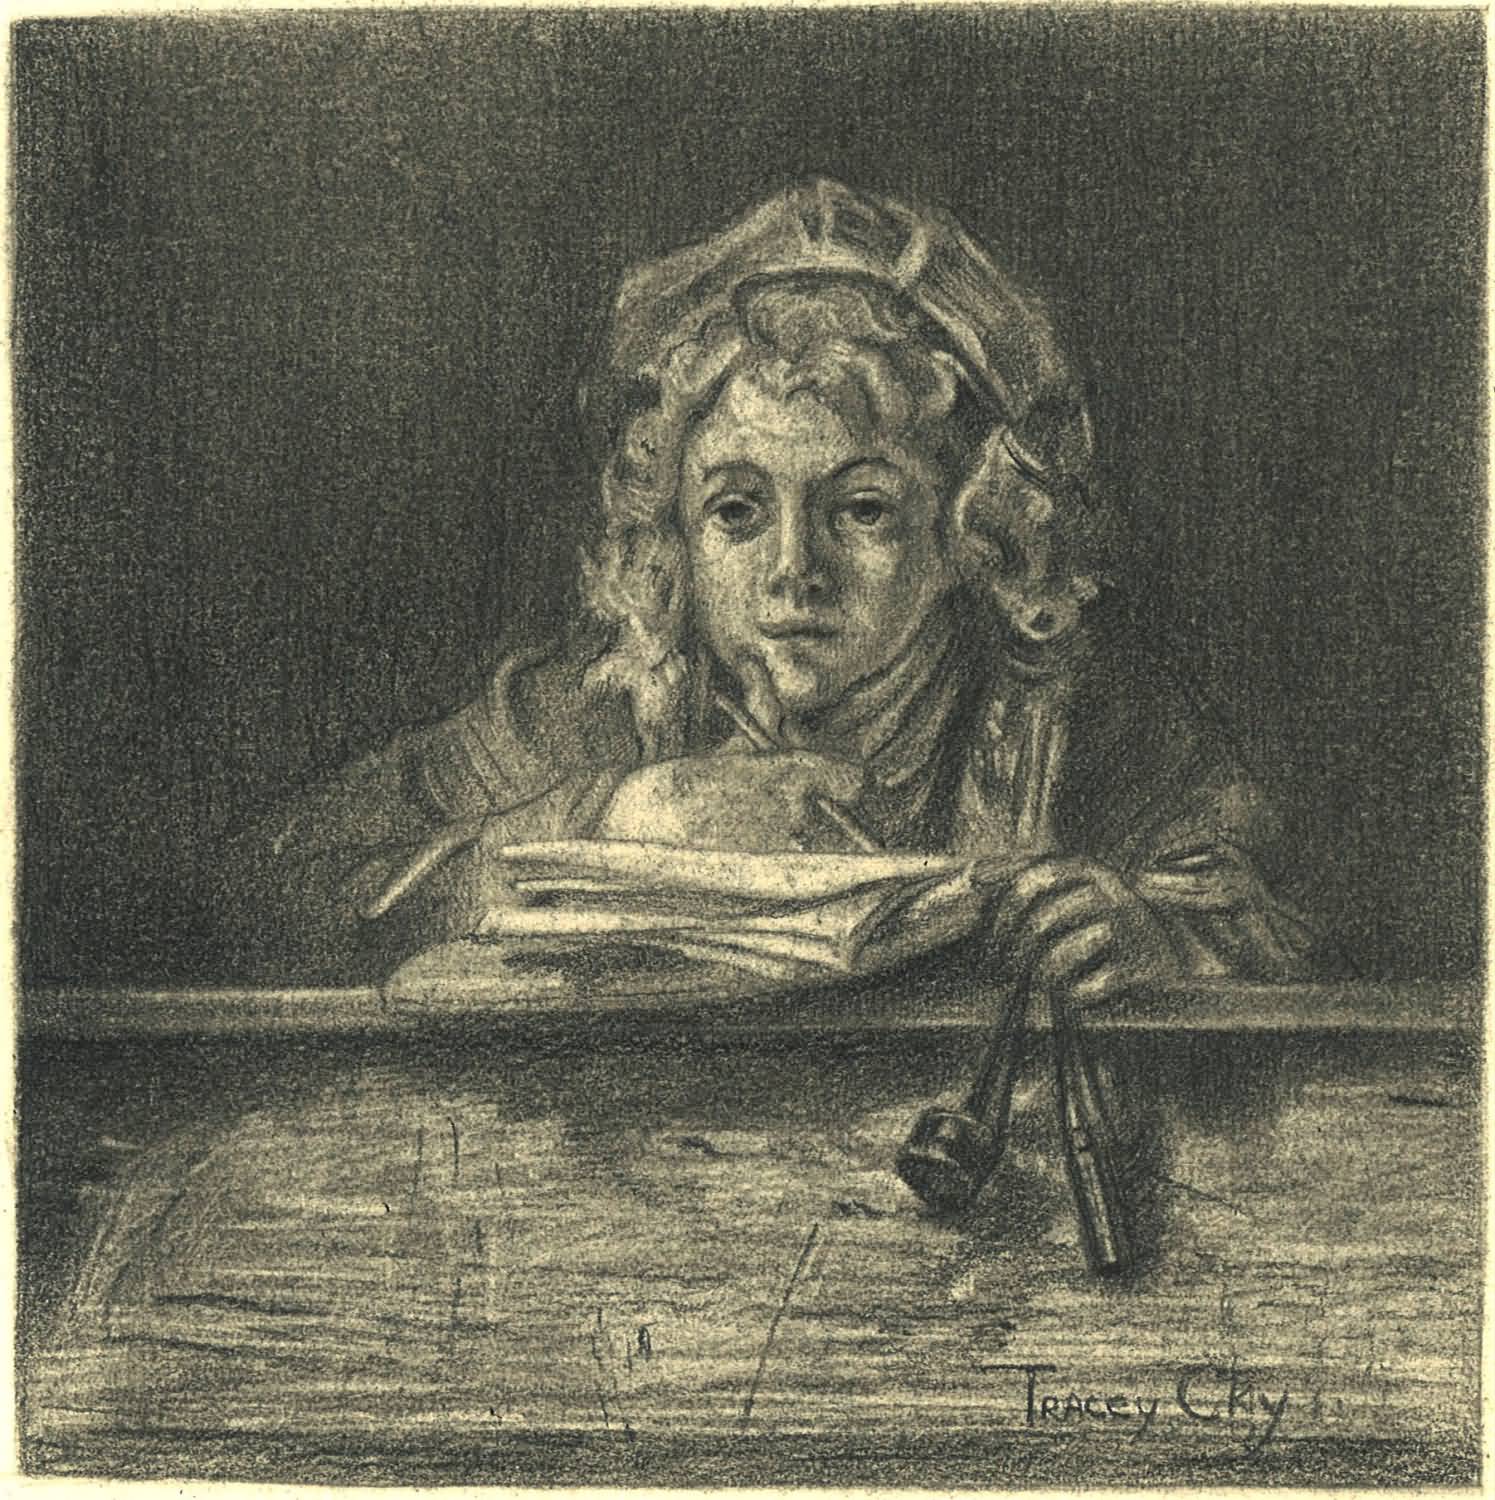 Child. Graphite on paper. 15x15 cm. Copy of the Rembrandt's painting. 2019